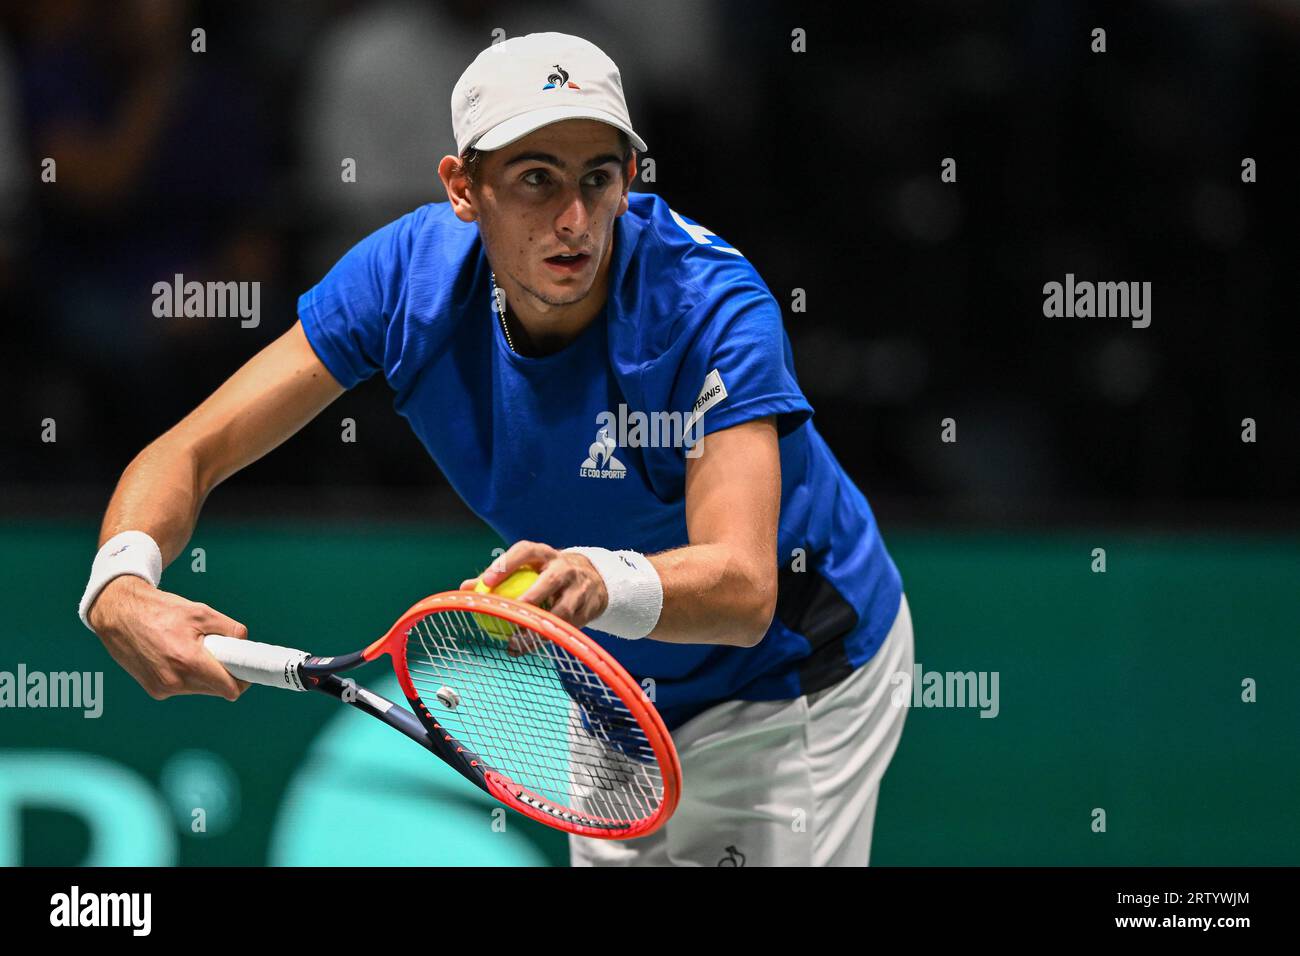 Matteo Arnold during the Davis Cup finals match between Italy and Canada at Unipol Arena in Bologna, Italia Tennis (Cristiano Mazzi/SPP) Credit SPP Sport Press Photo